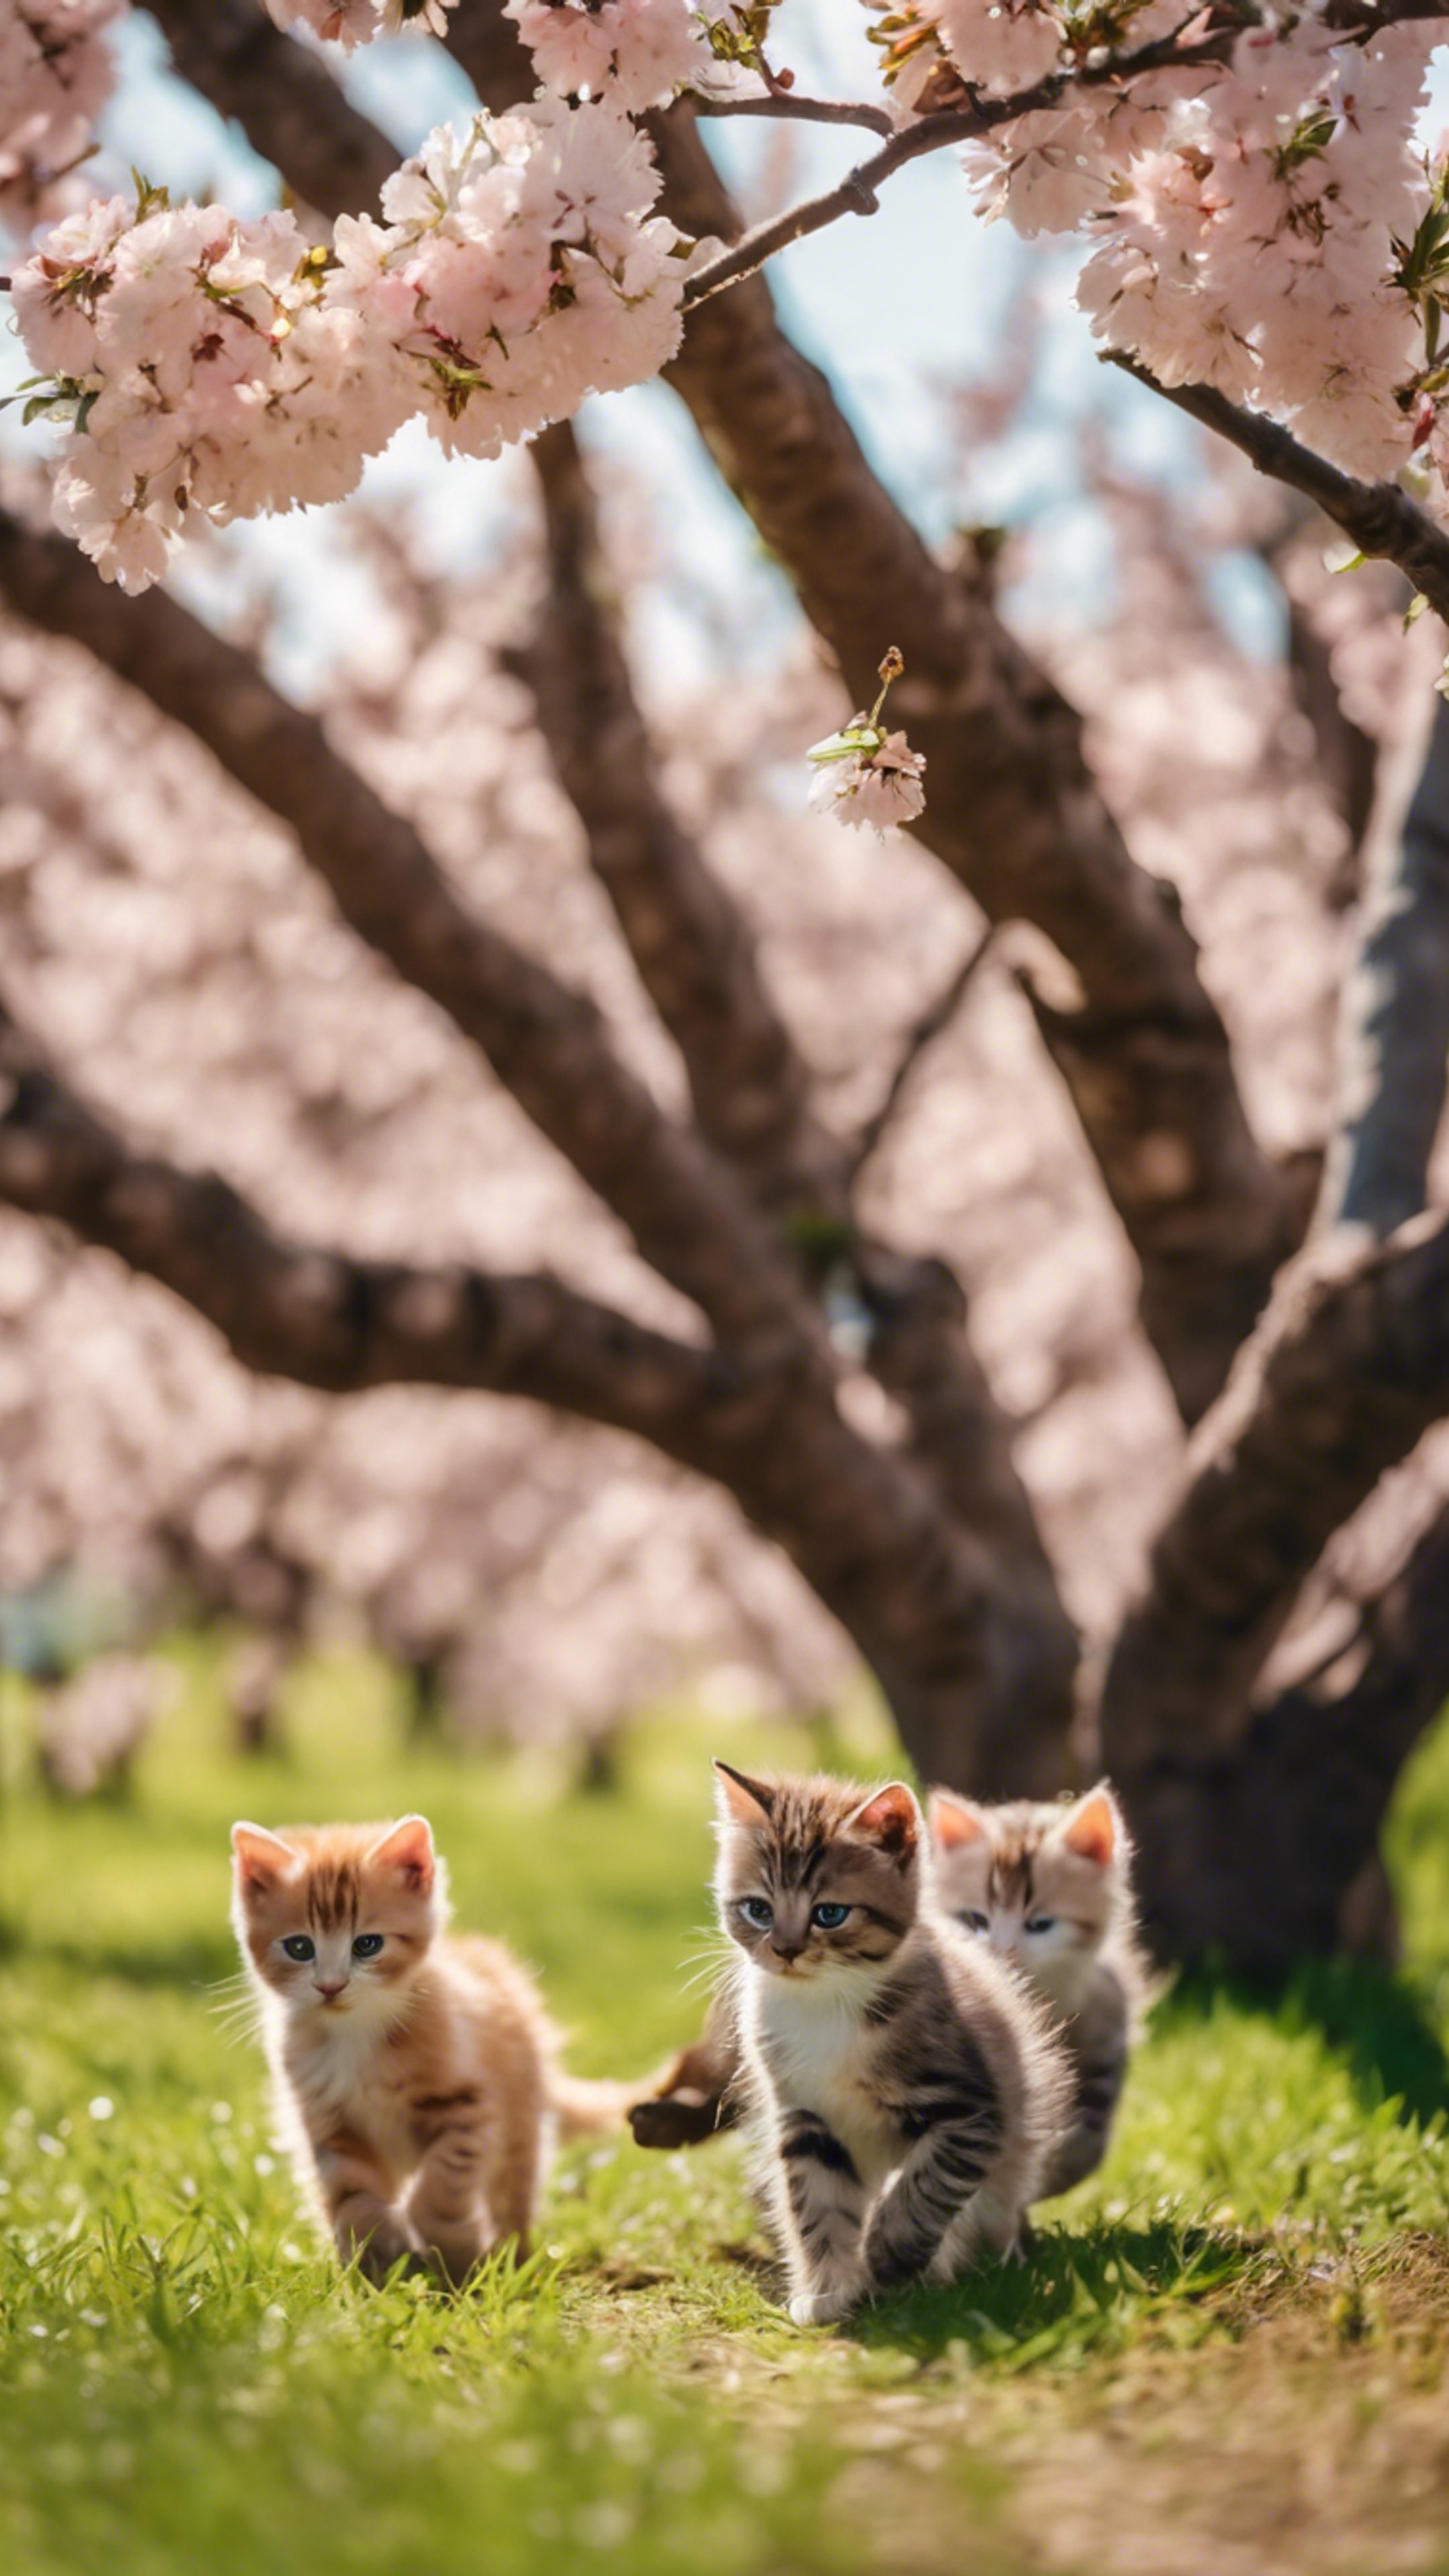 A group of multi-colored kittens chasing their shadows under a peach tree during a beautiful spring afternoon. ورق الجدران[1b8583aedfab46758668]